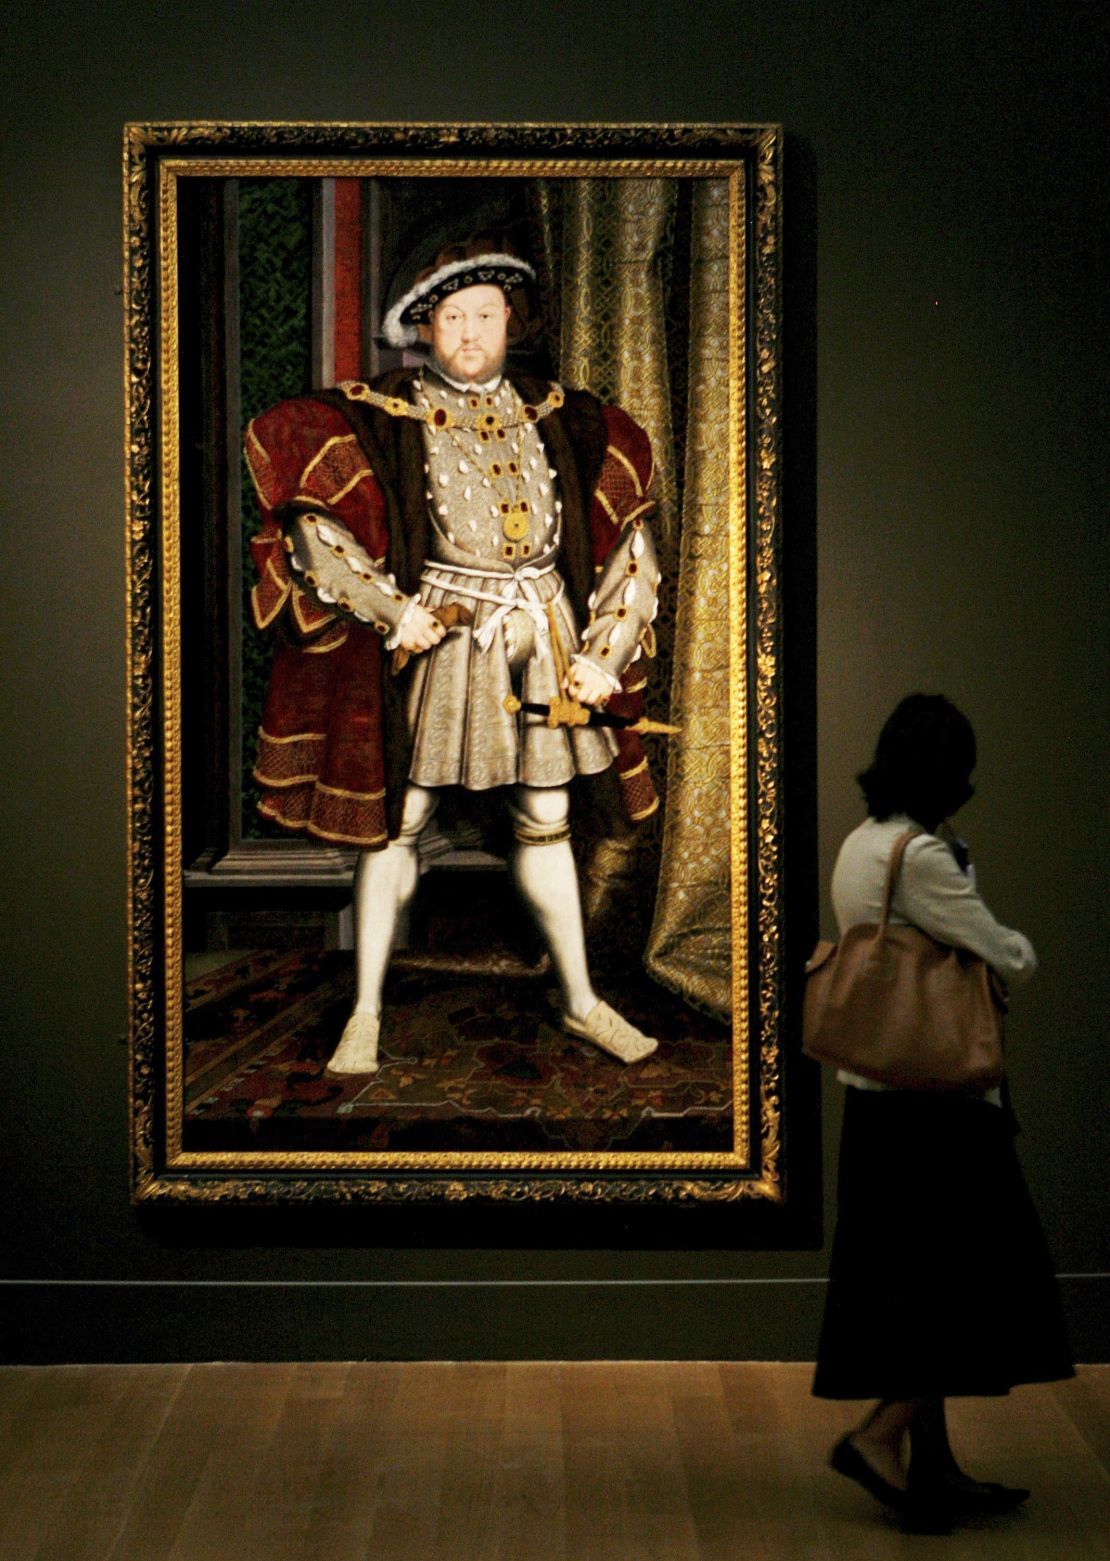 King Henry VIII by Hans Holbein at Tate Britain. He was not to be crossed.